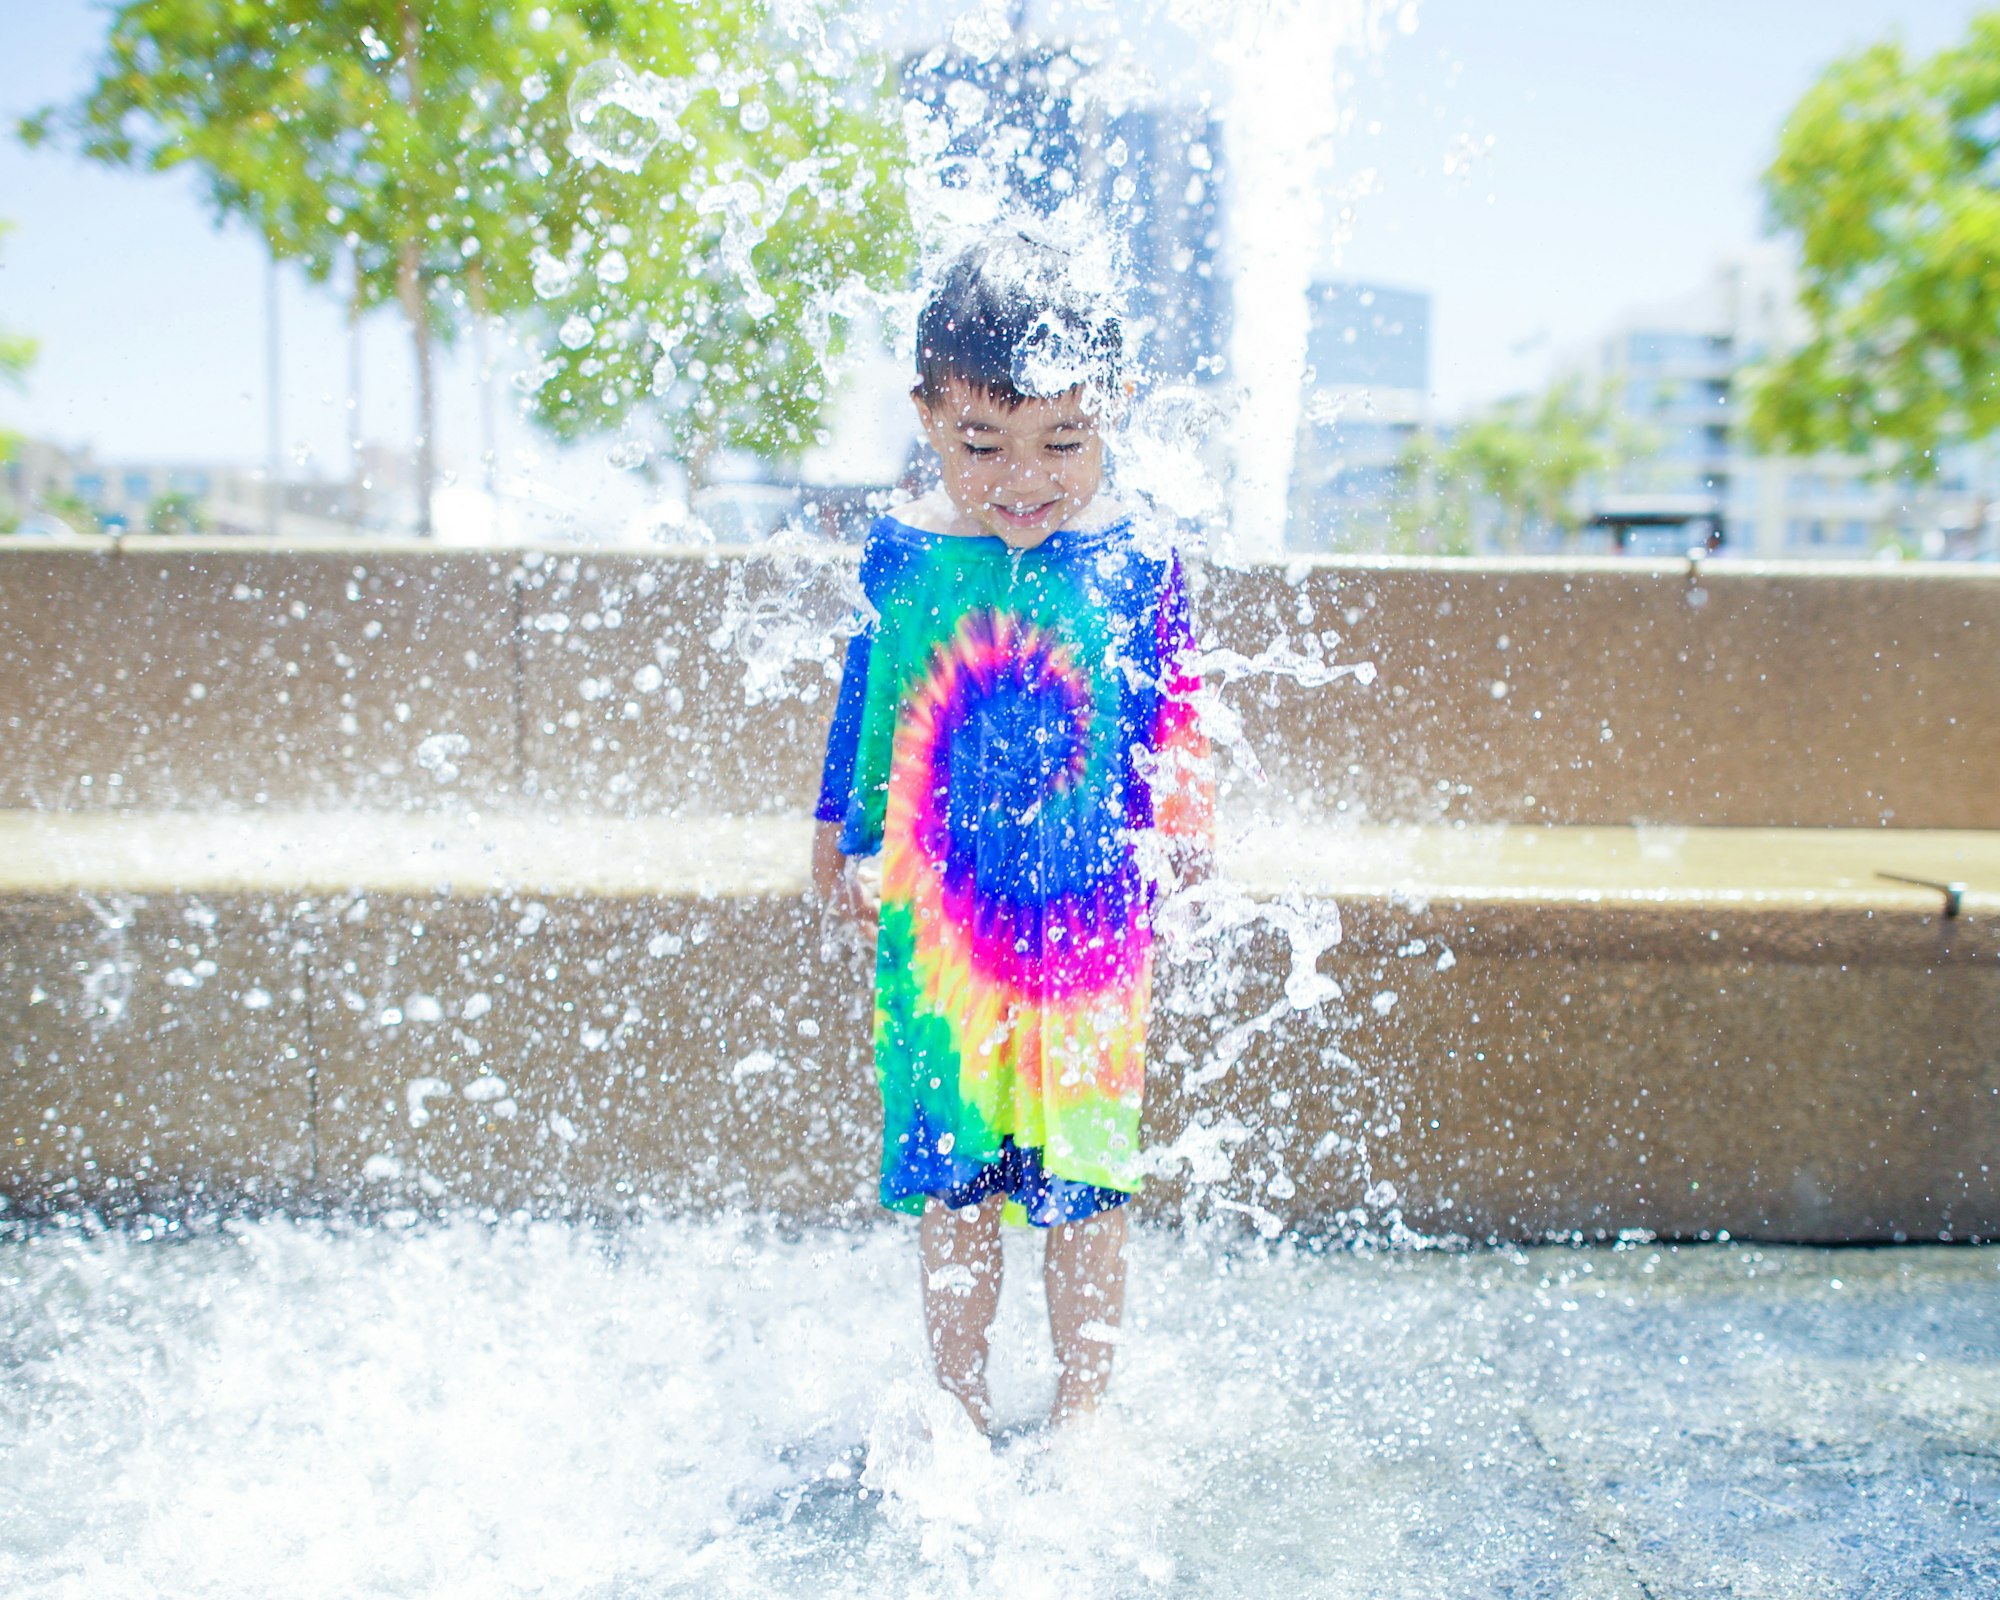 A child wearing a tie-dyed shirt while playing with water splashes.